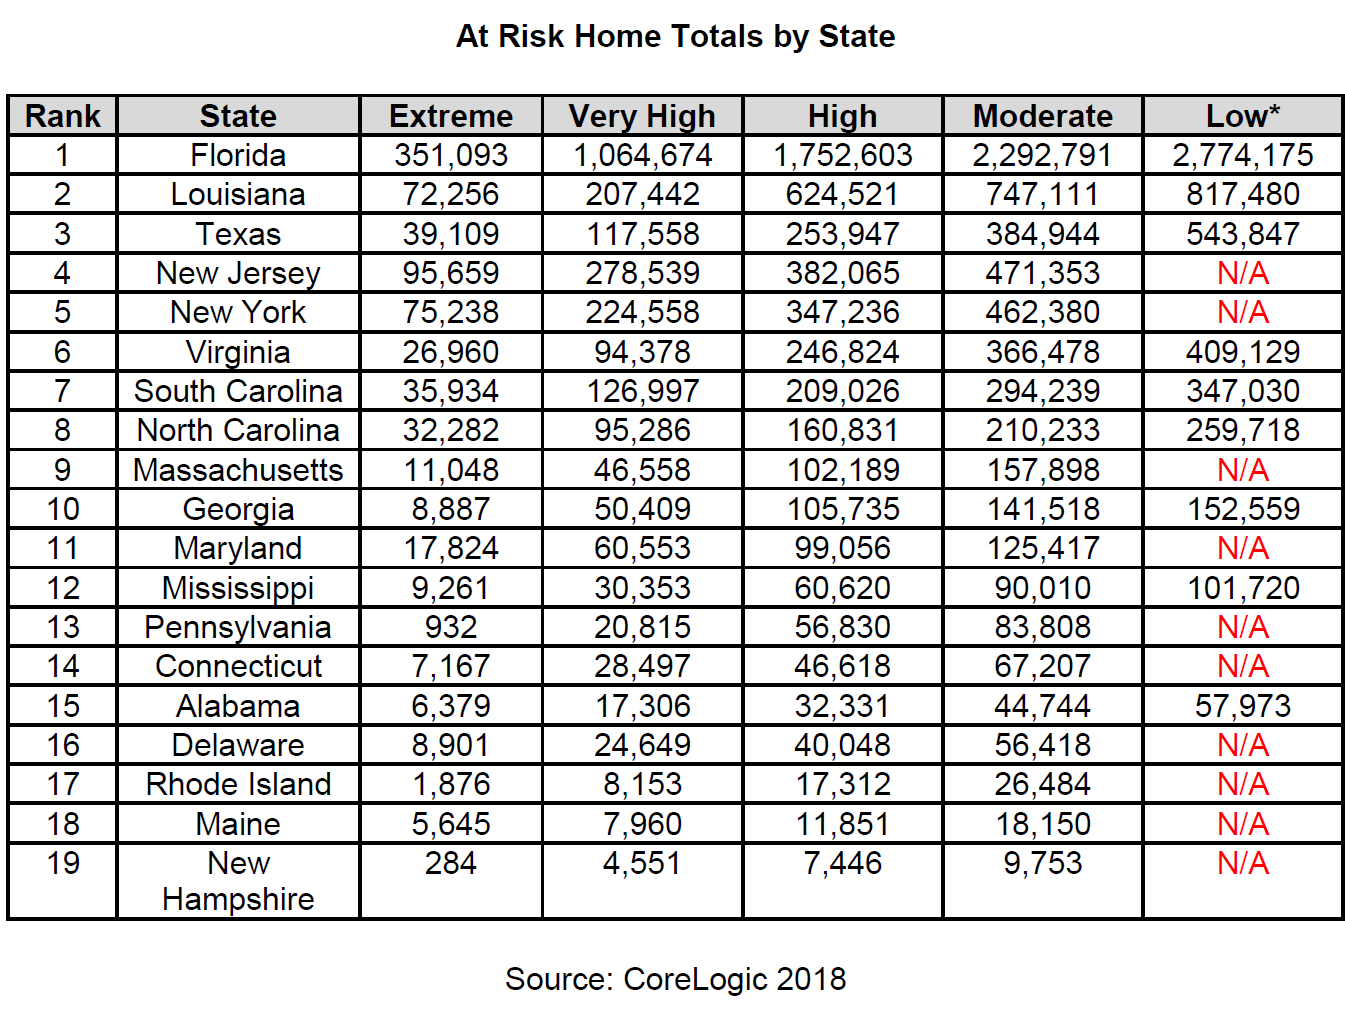 At-Risk-Home-Totals-by-State.png